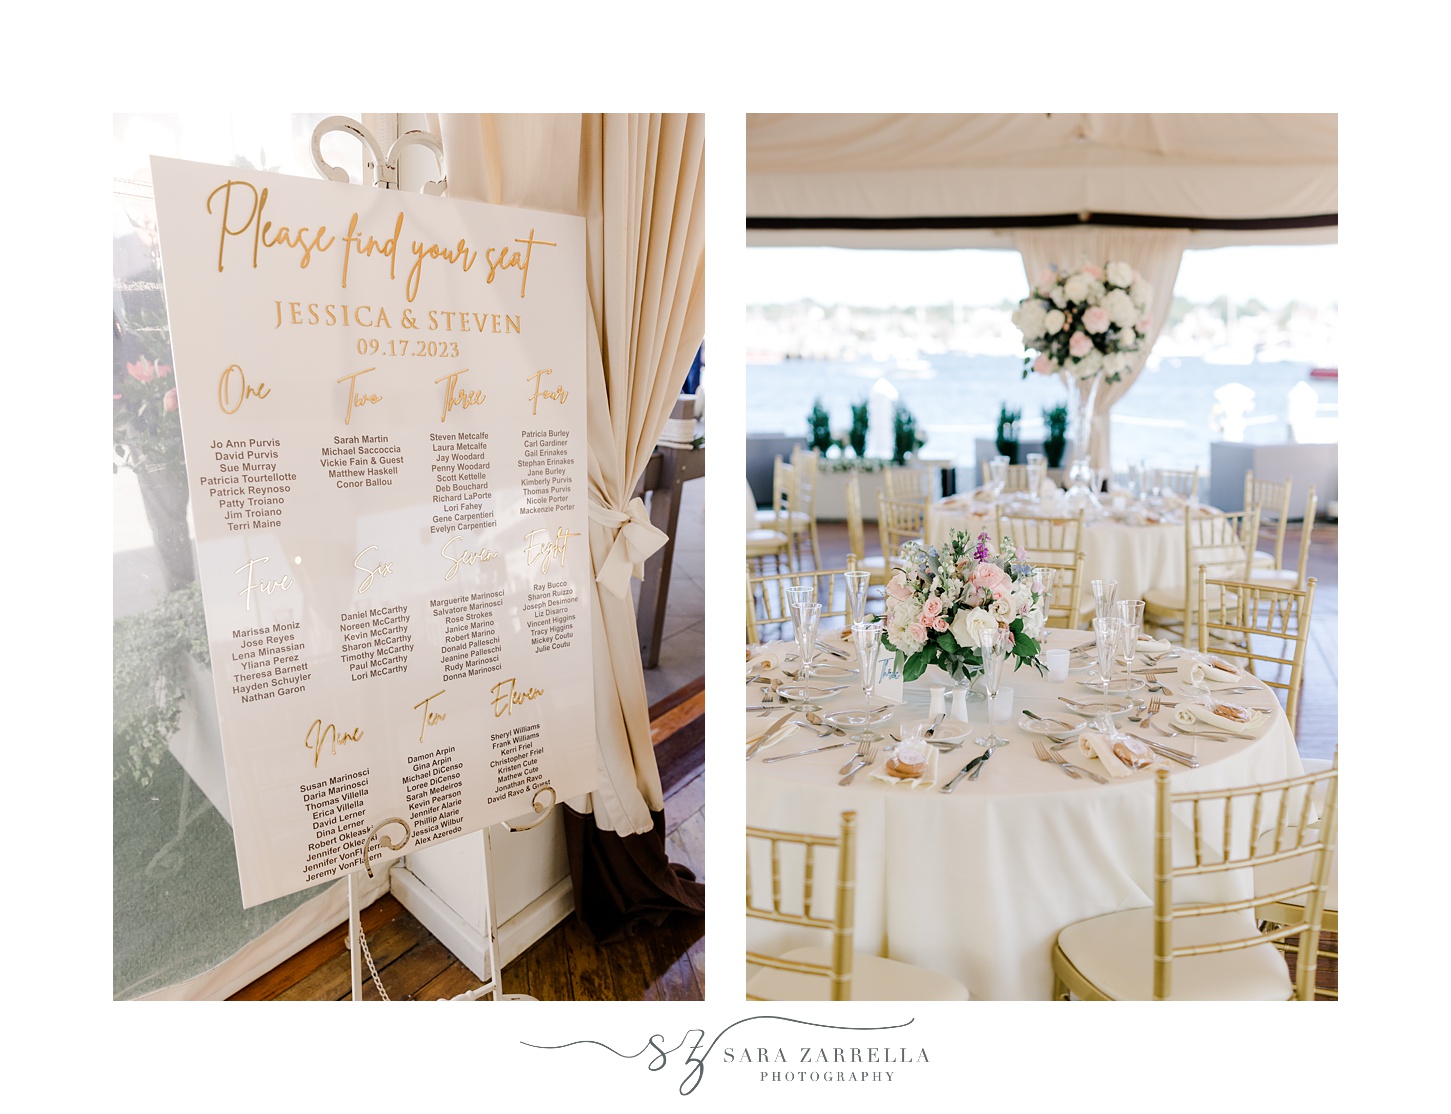 wedding reception with pink, white and gold details at Regatta Place